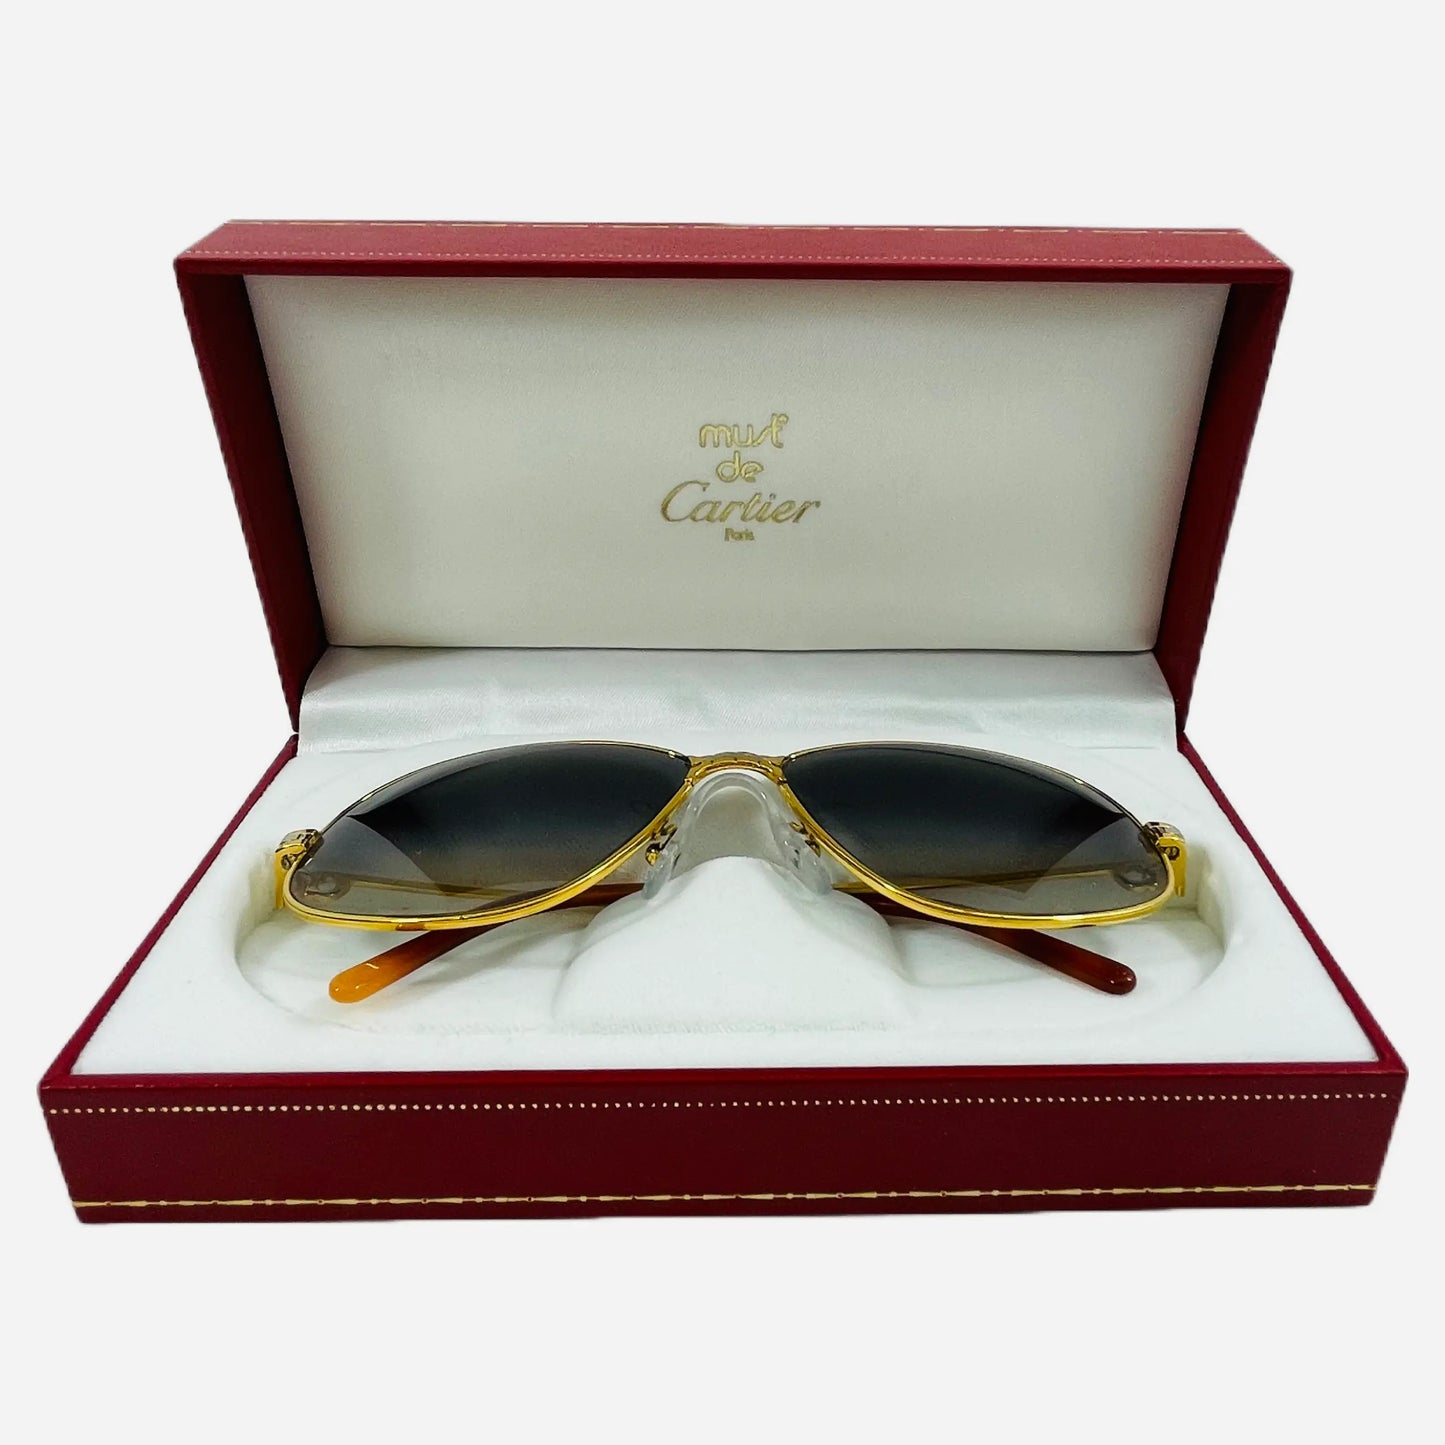 Vintage-Cartier-Panthere-Sonnenbrille-Sunglasses-G.M.-22CT-Gold-Plated-the-seekers-with-box-2